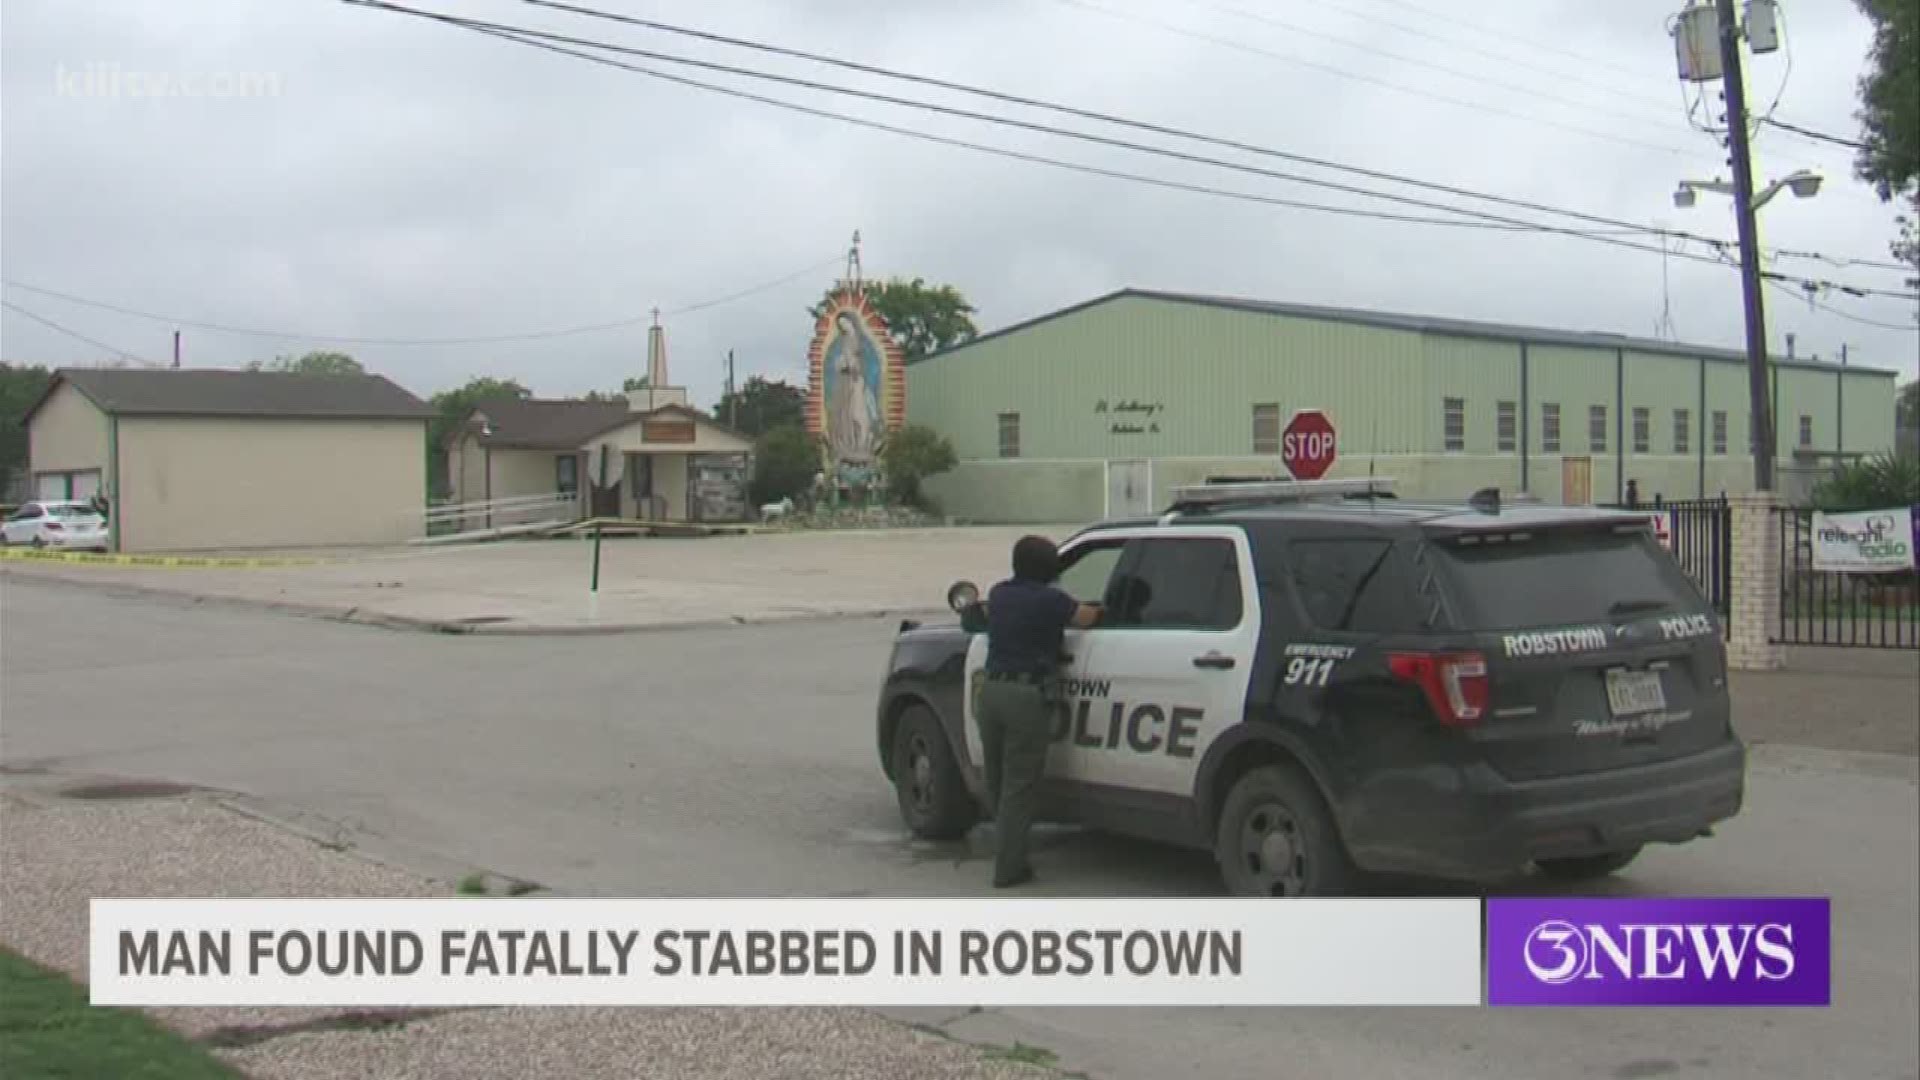 Robstown police said the victim was identified as 65-year-old Edward Paul Hernandez, a painter, who was well known around town.